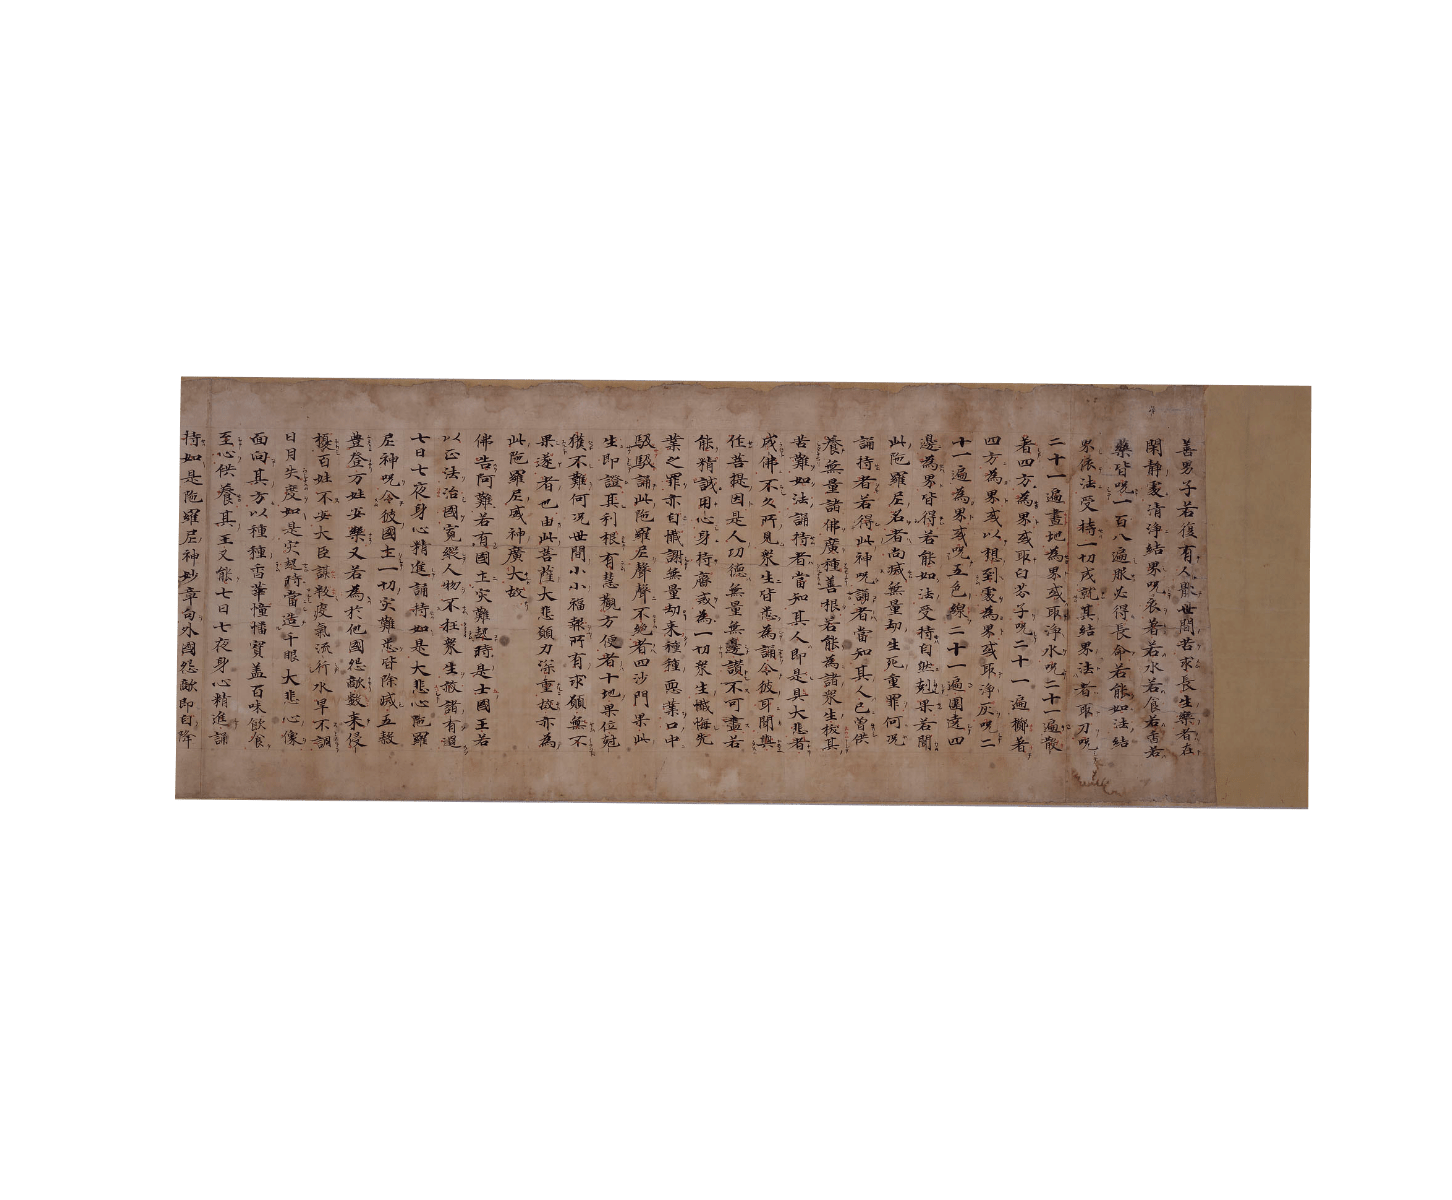 Sutra of the Incantation of the One Thousand-Armed